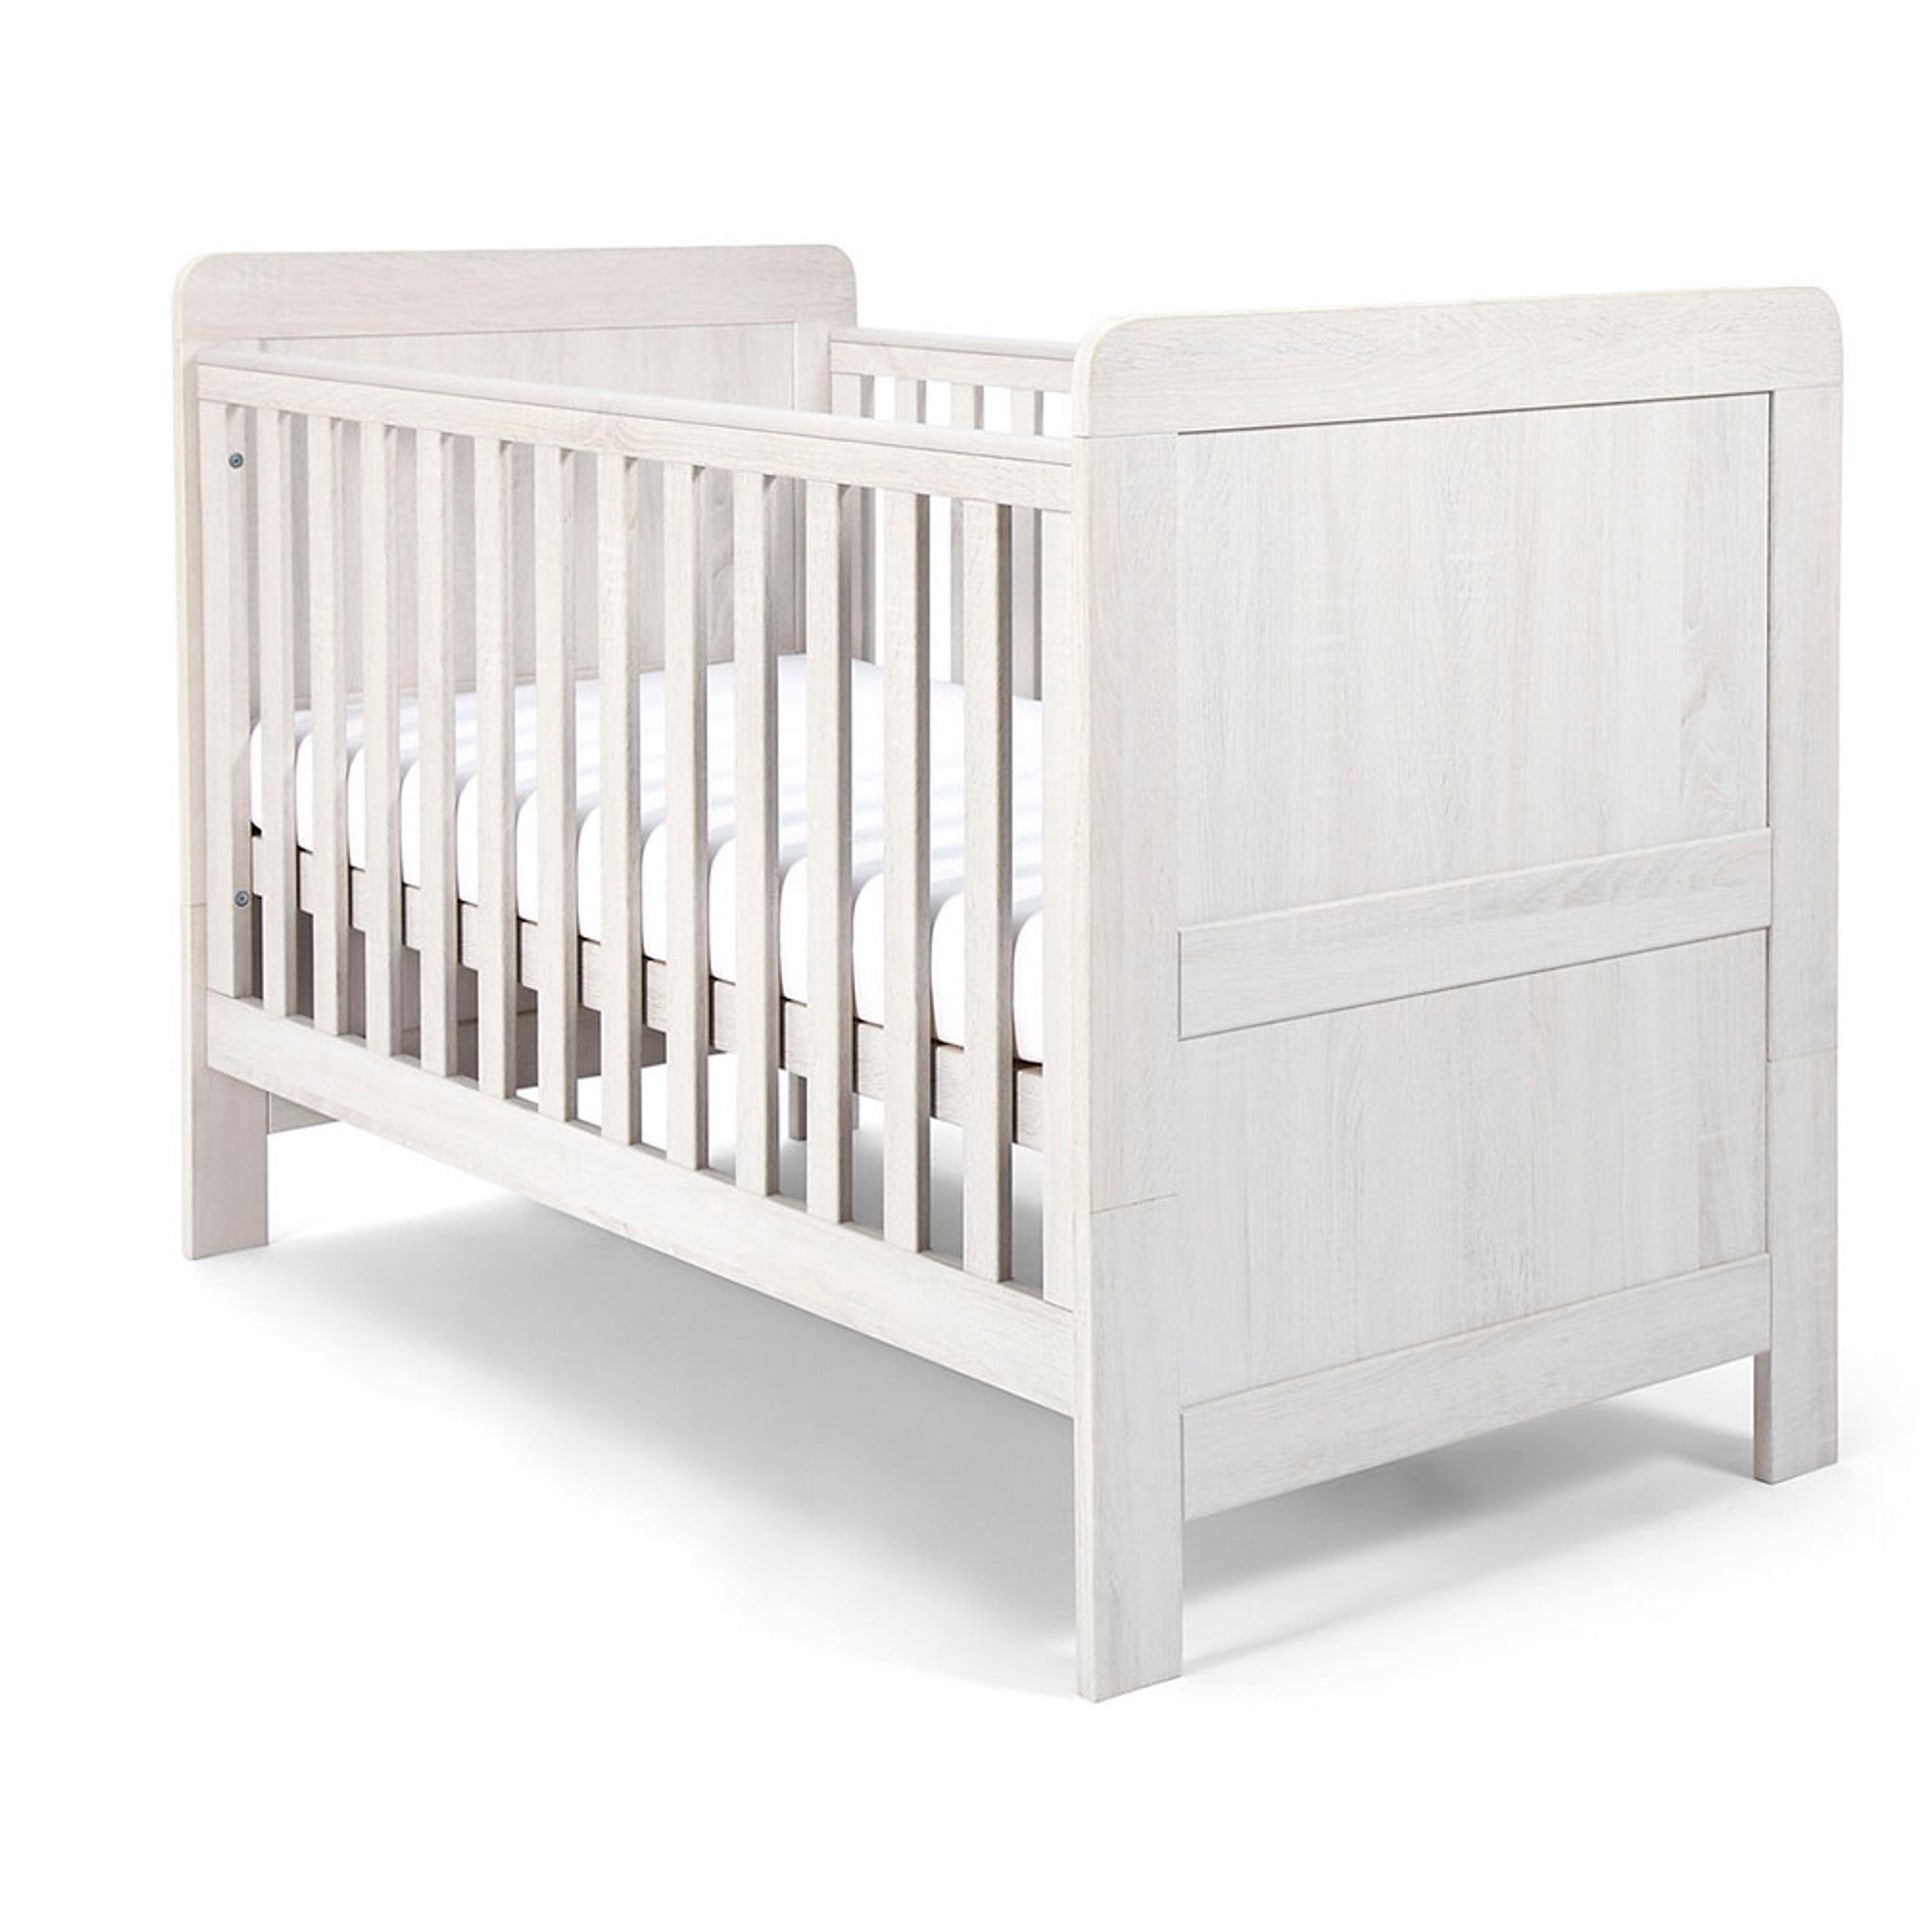 Mamas & Papas Atlas 3 Piece Cot/Toddler Bed Set - Nimbus White -Instore Collection Only